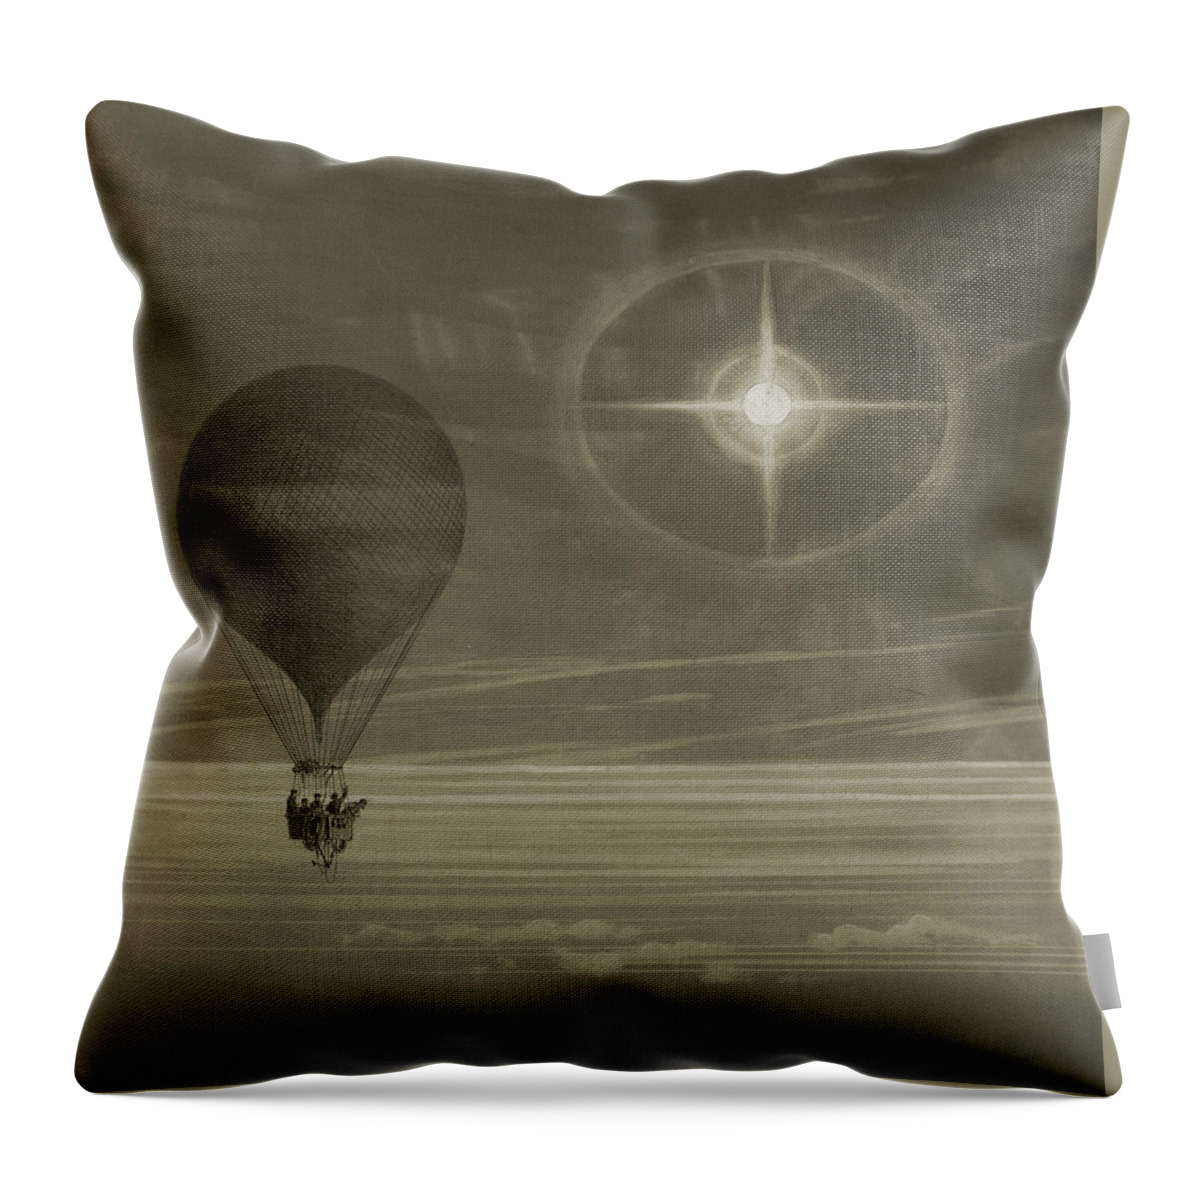  Throw Pillow featuring the drawing Into the night sky by Vintage Pix